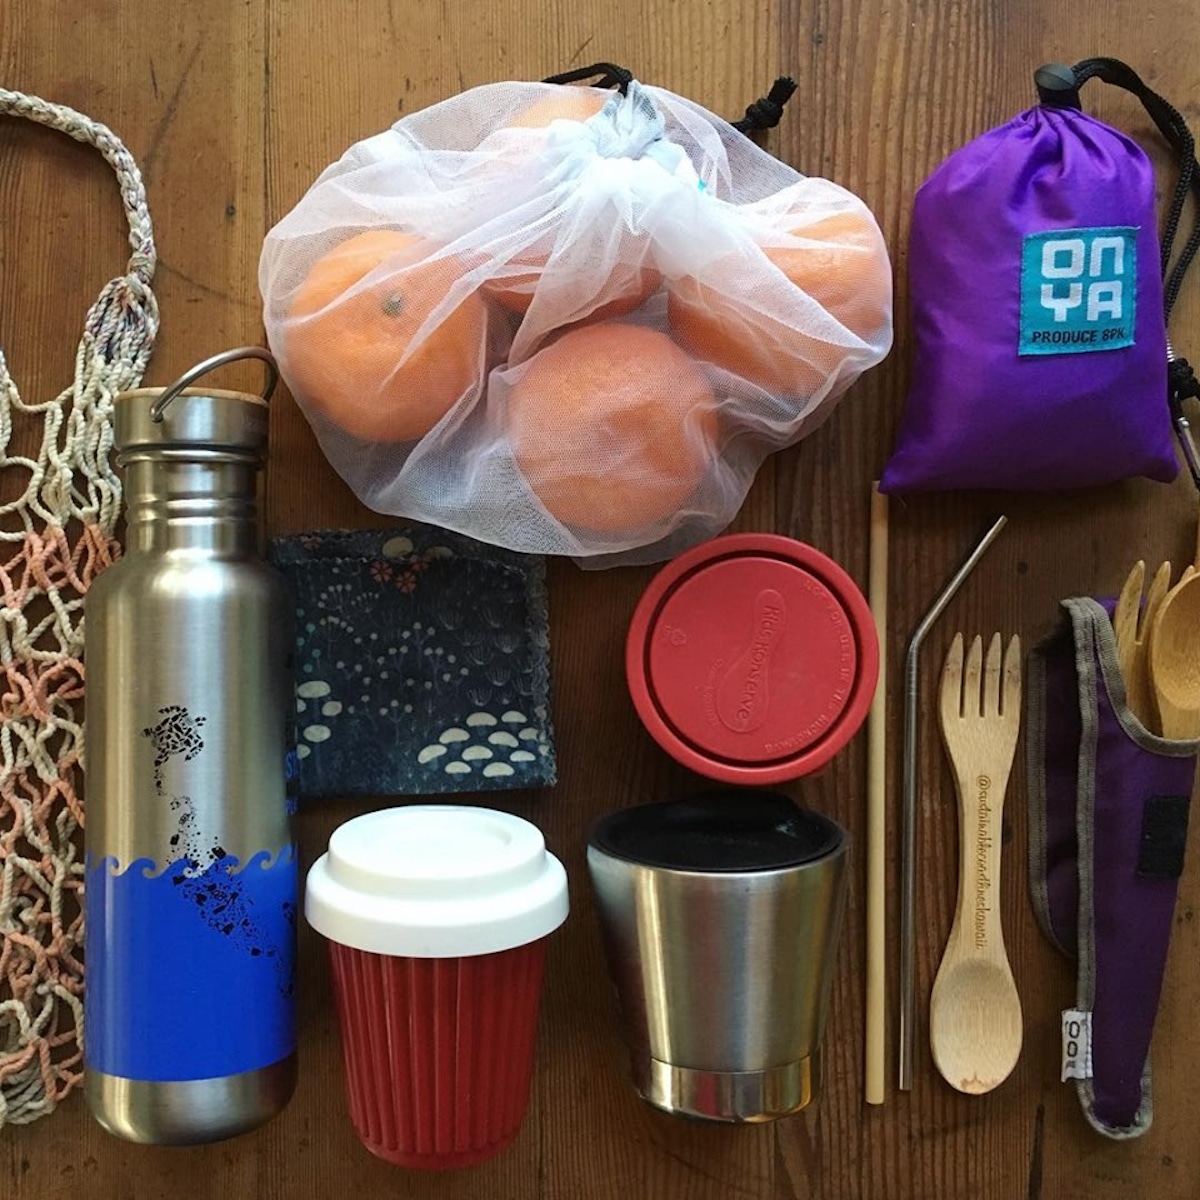 Plastic-free and reusable items including a water bottle, coffee cup, cutlery and food storage bags